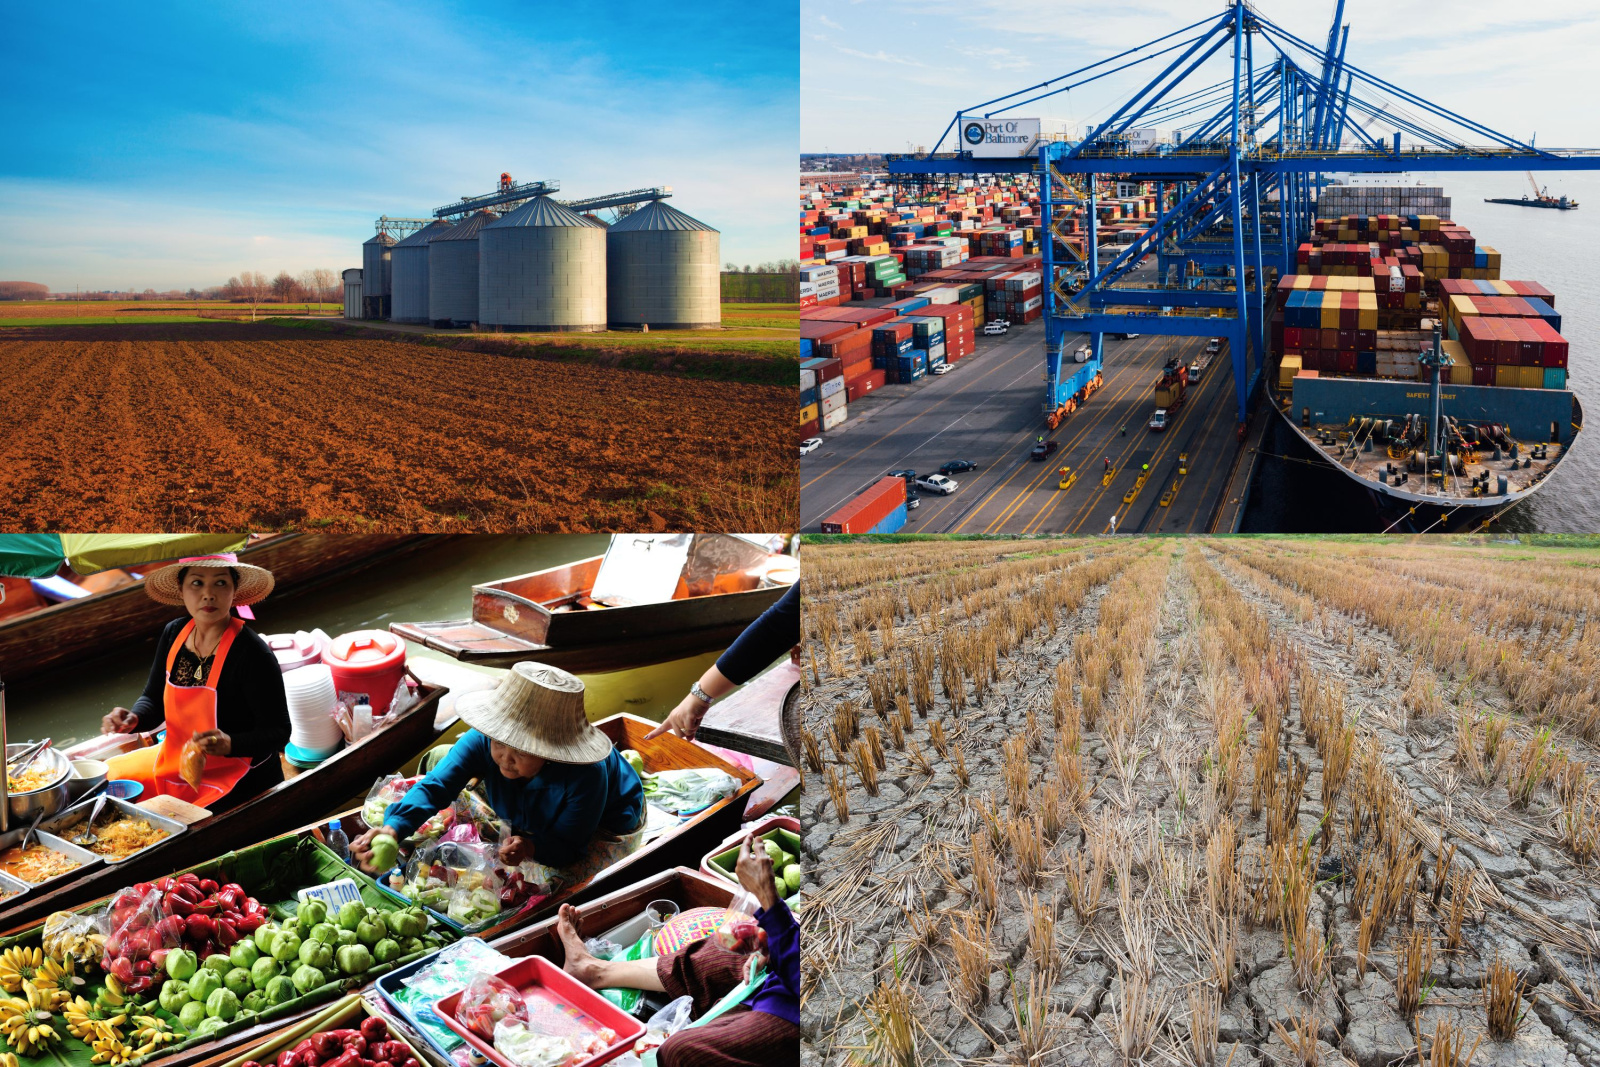 Four picture collage of grain silos on a farm, a large cargo ship in a port, Asian women in boats with food at a floating market, and an arid farm with dried up crops.